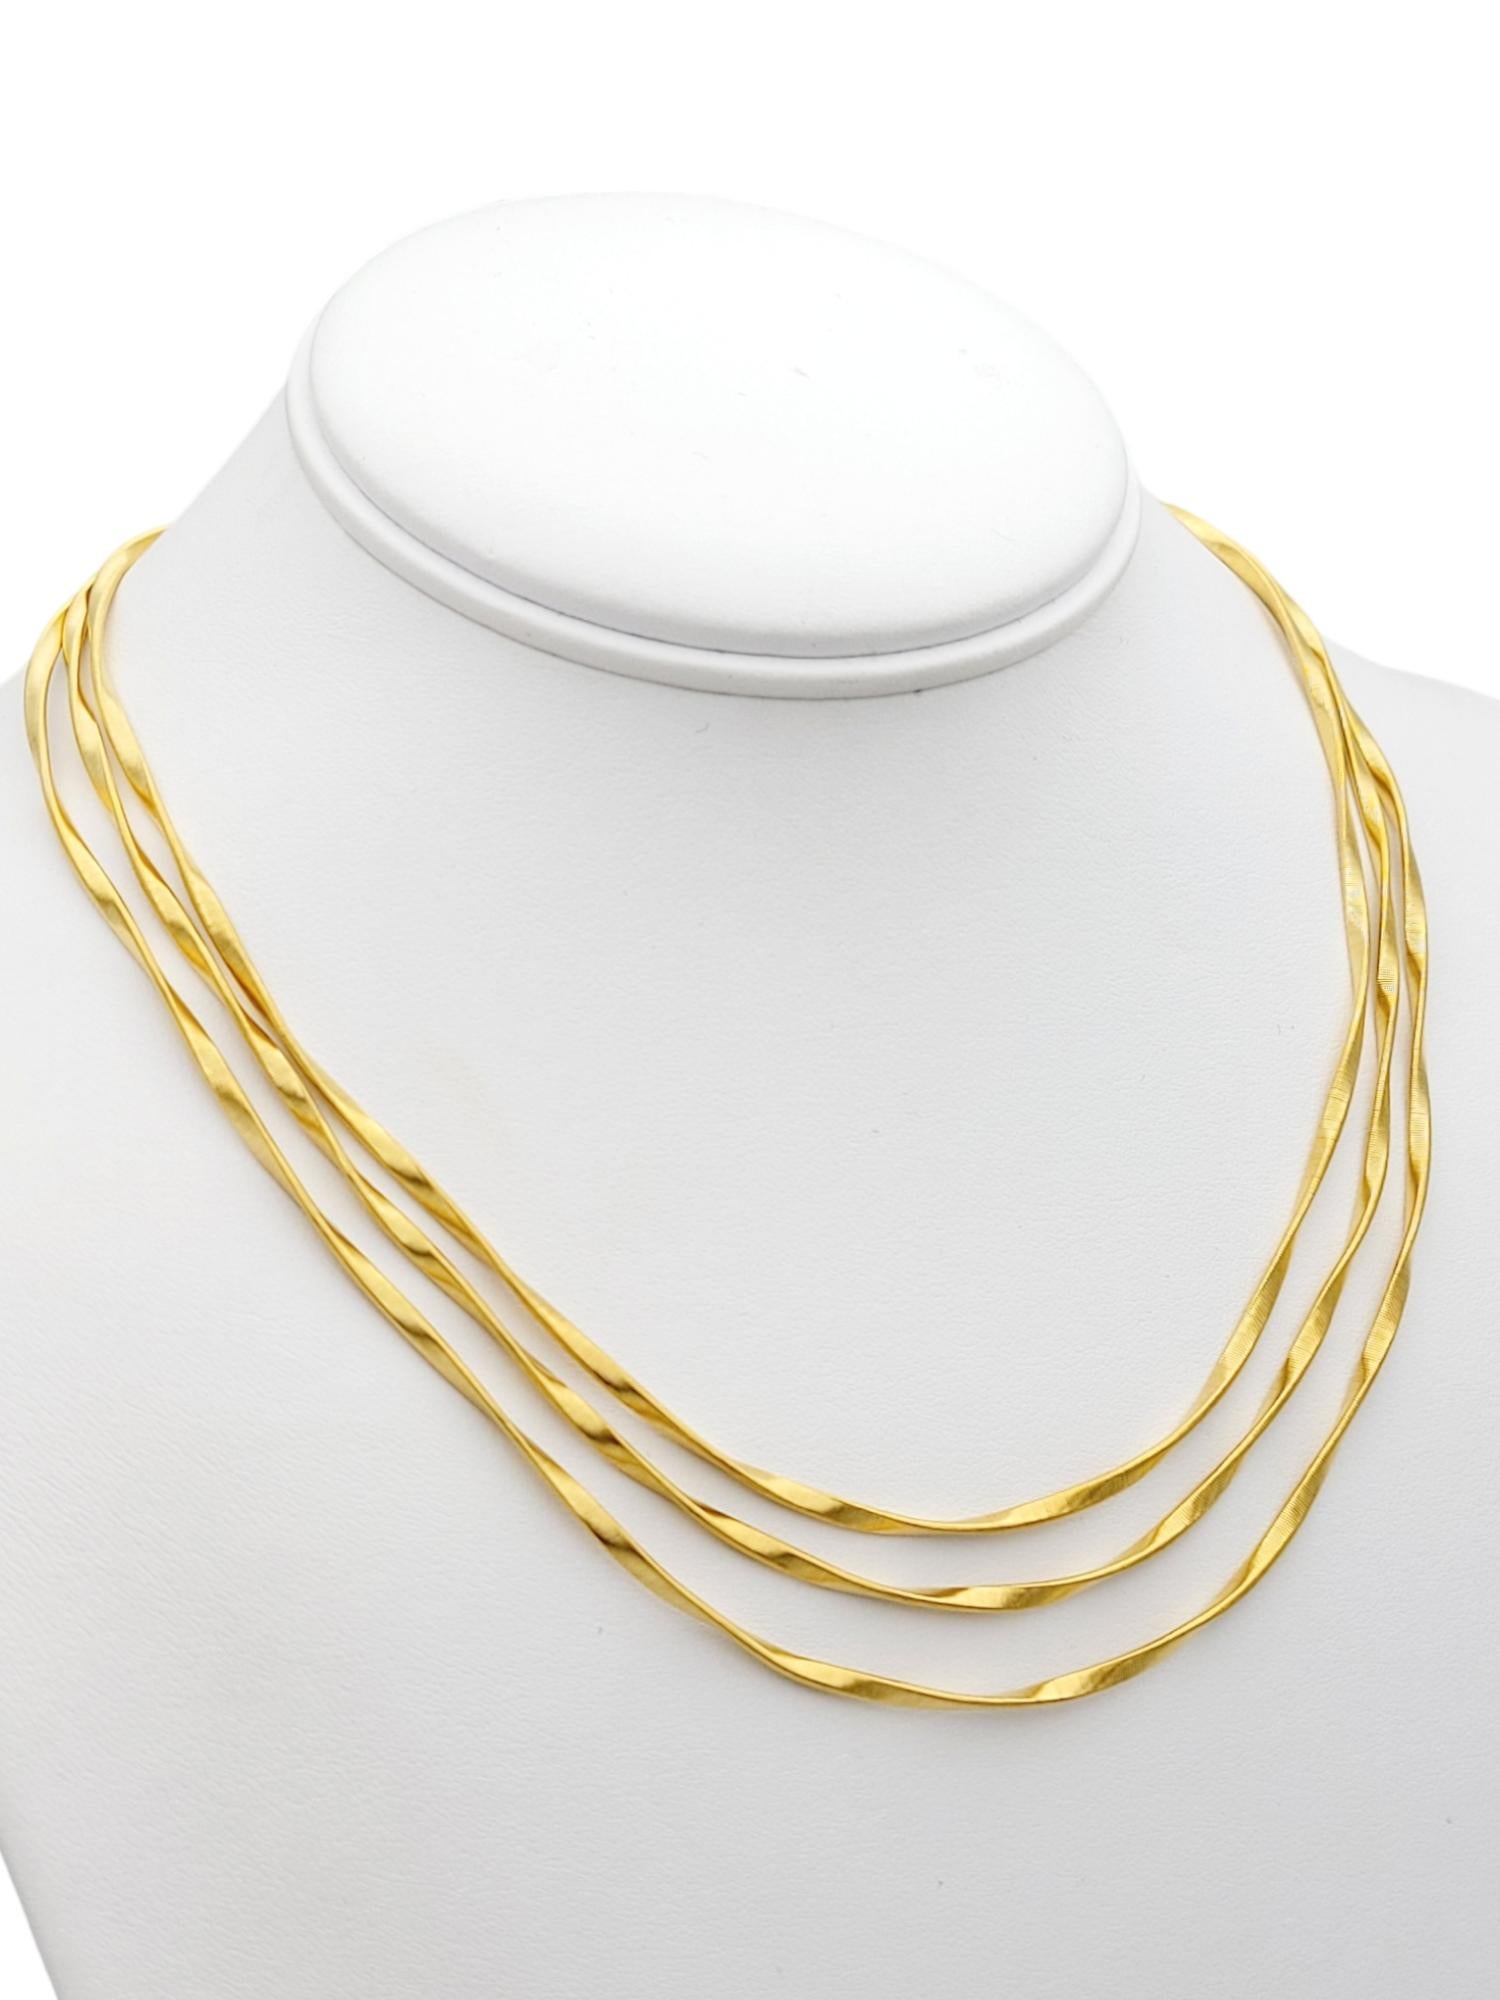 Contemporary MarCo Bicego Marrakech Collection Three-Strand Necklace in 18 Karat Yellow Gold For Sale